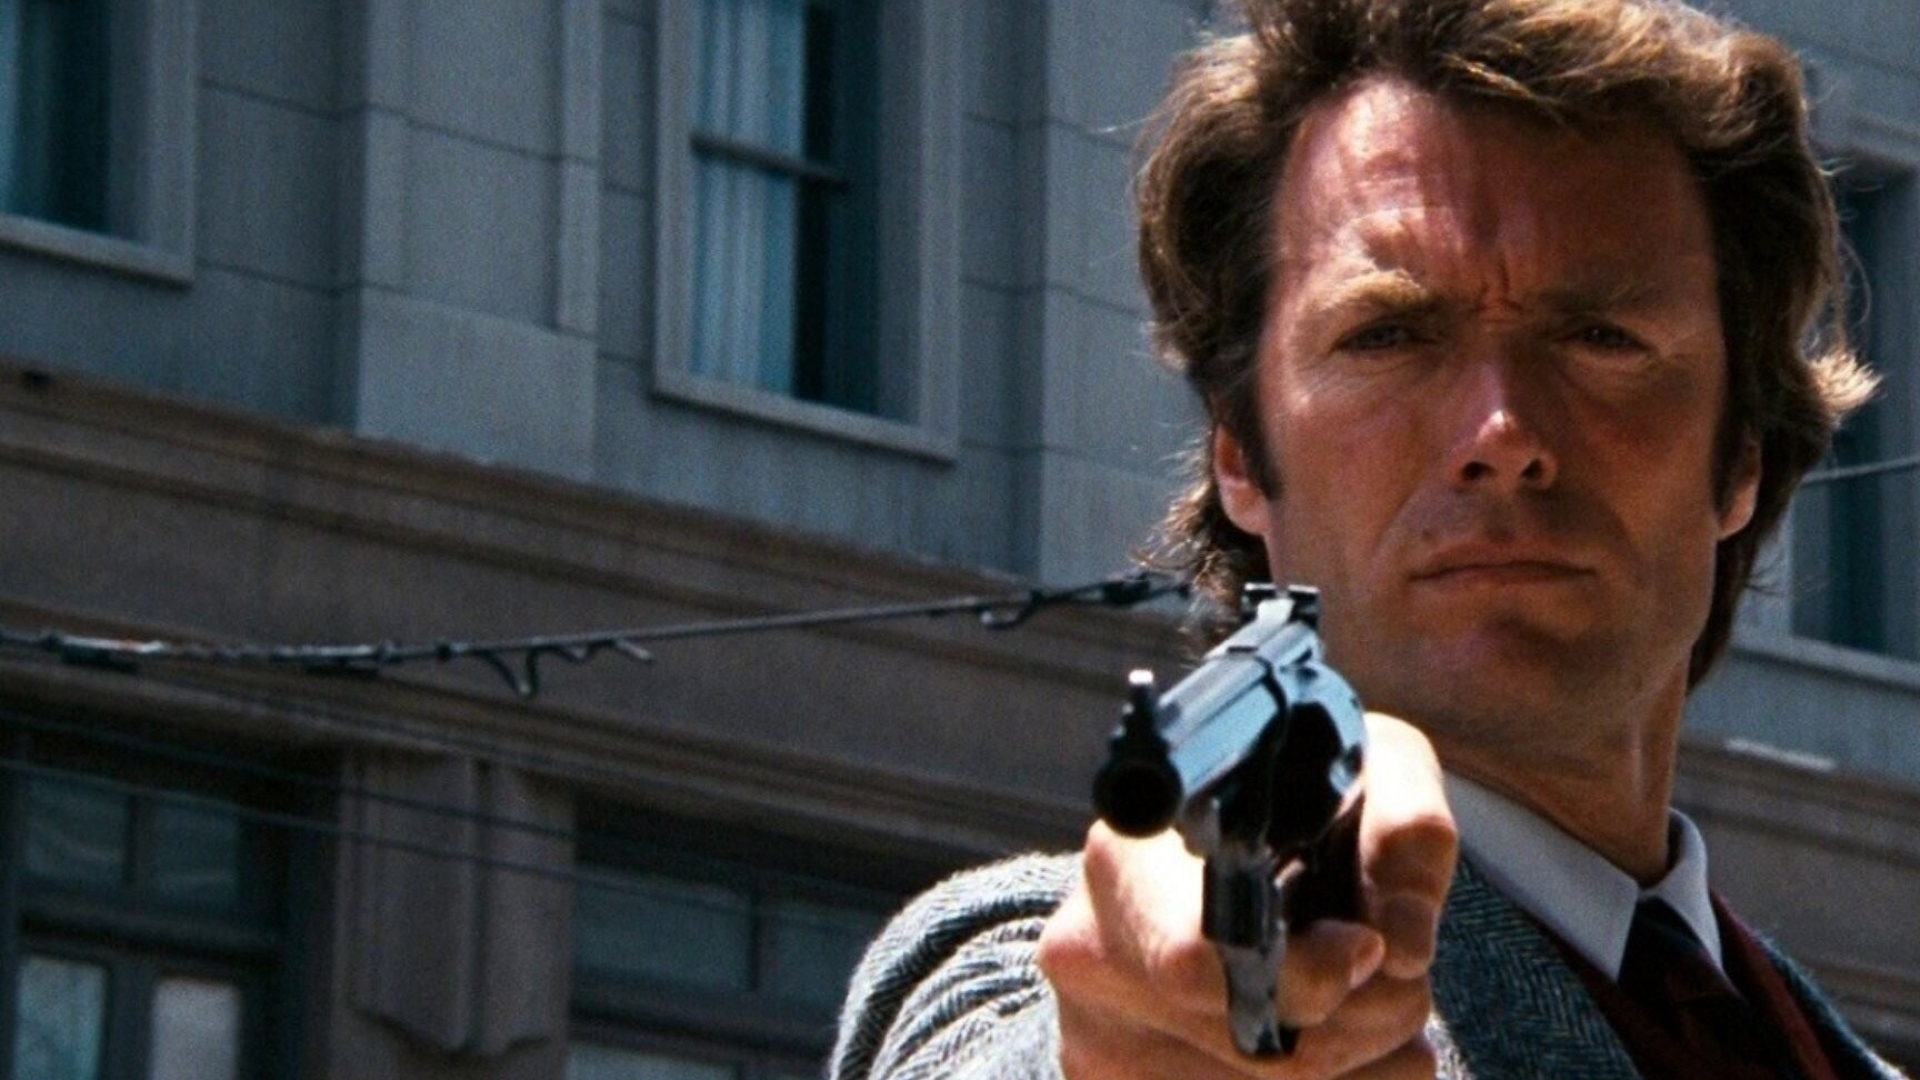 Clint Eastwood: Dirty Harry, An American Neo-Noir Action Thriller Film, Directed By Don Siegel, 1971. 1920x1080 Full HD Background.